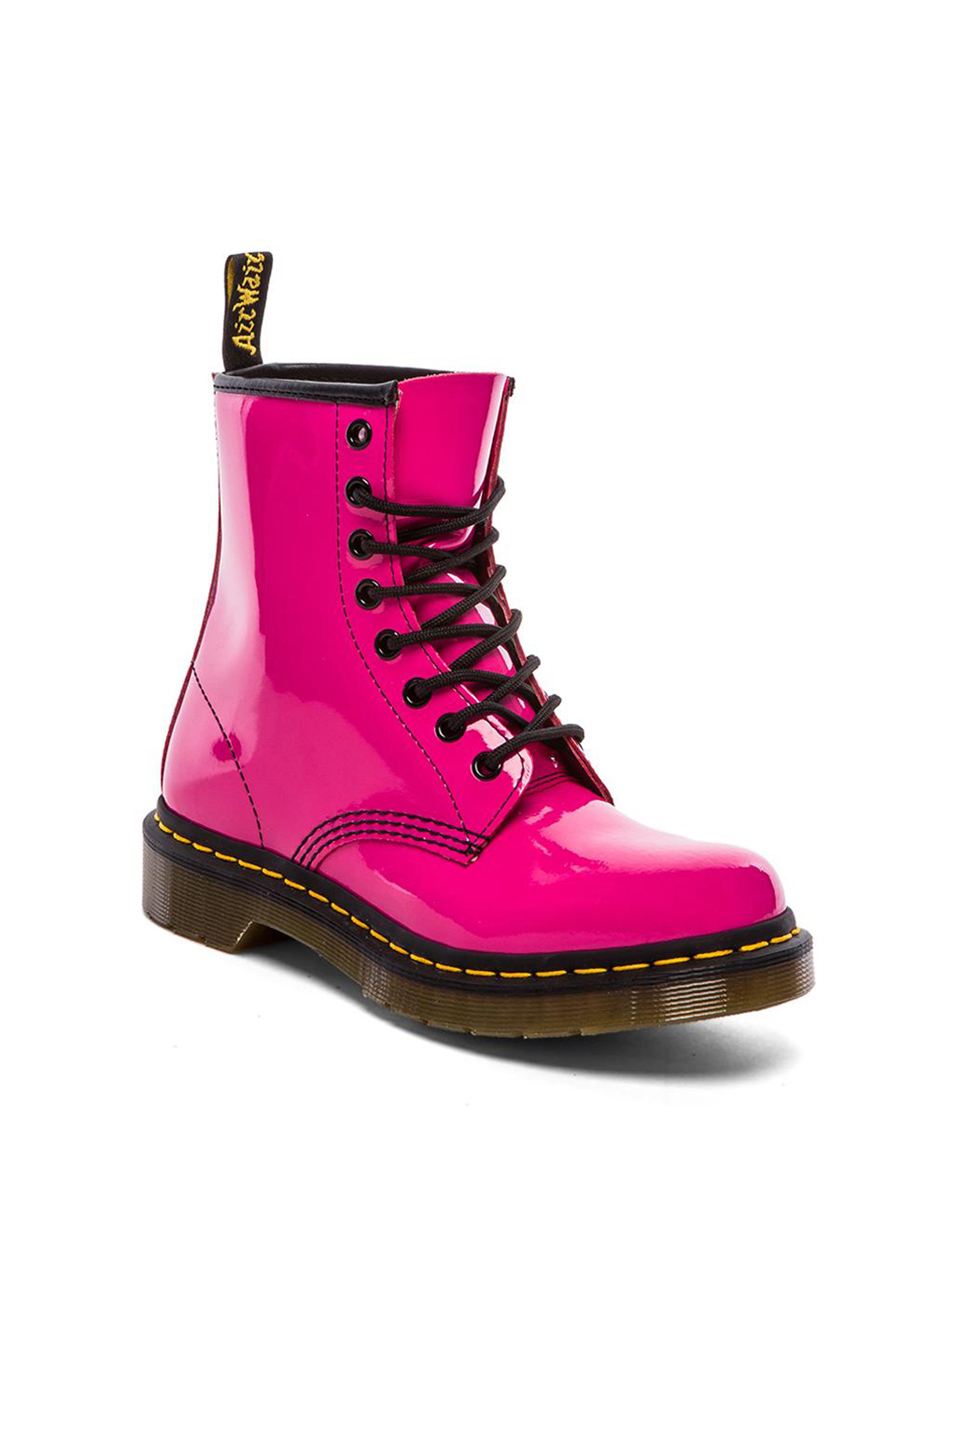 Dr. Martens 1460 W 8-eye Boot in Hot Pink (Pink) - Lyst